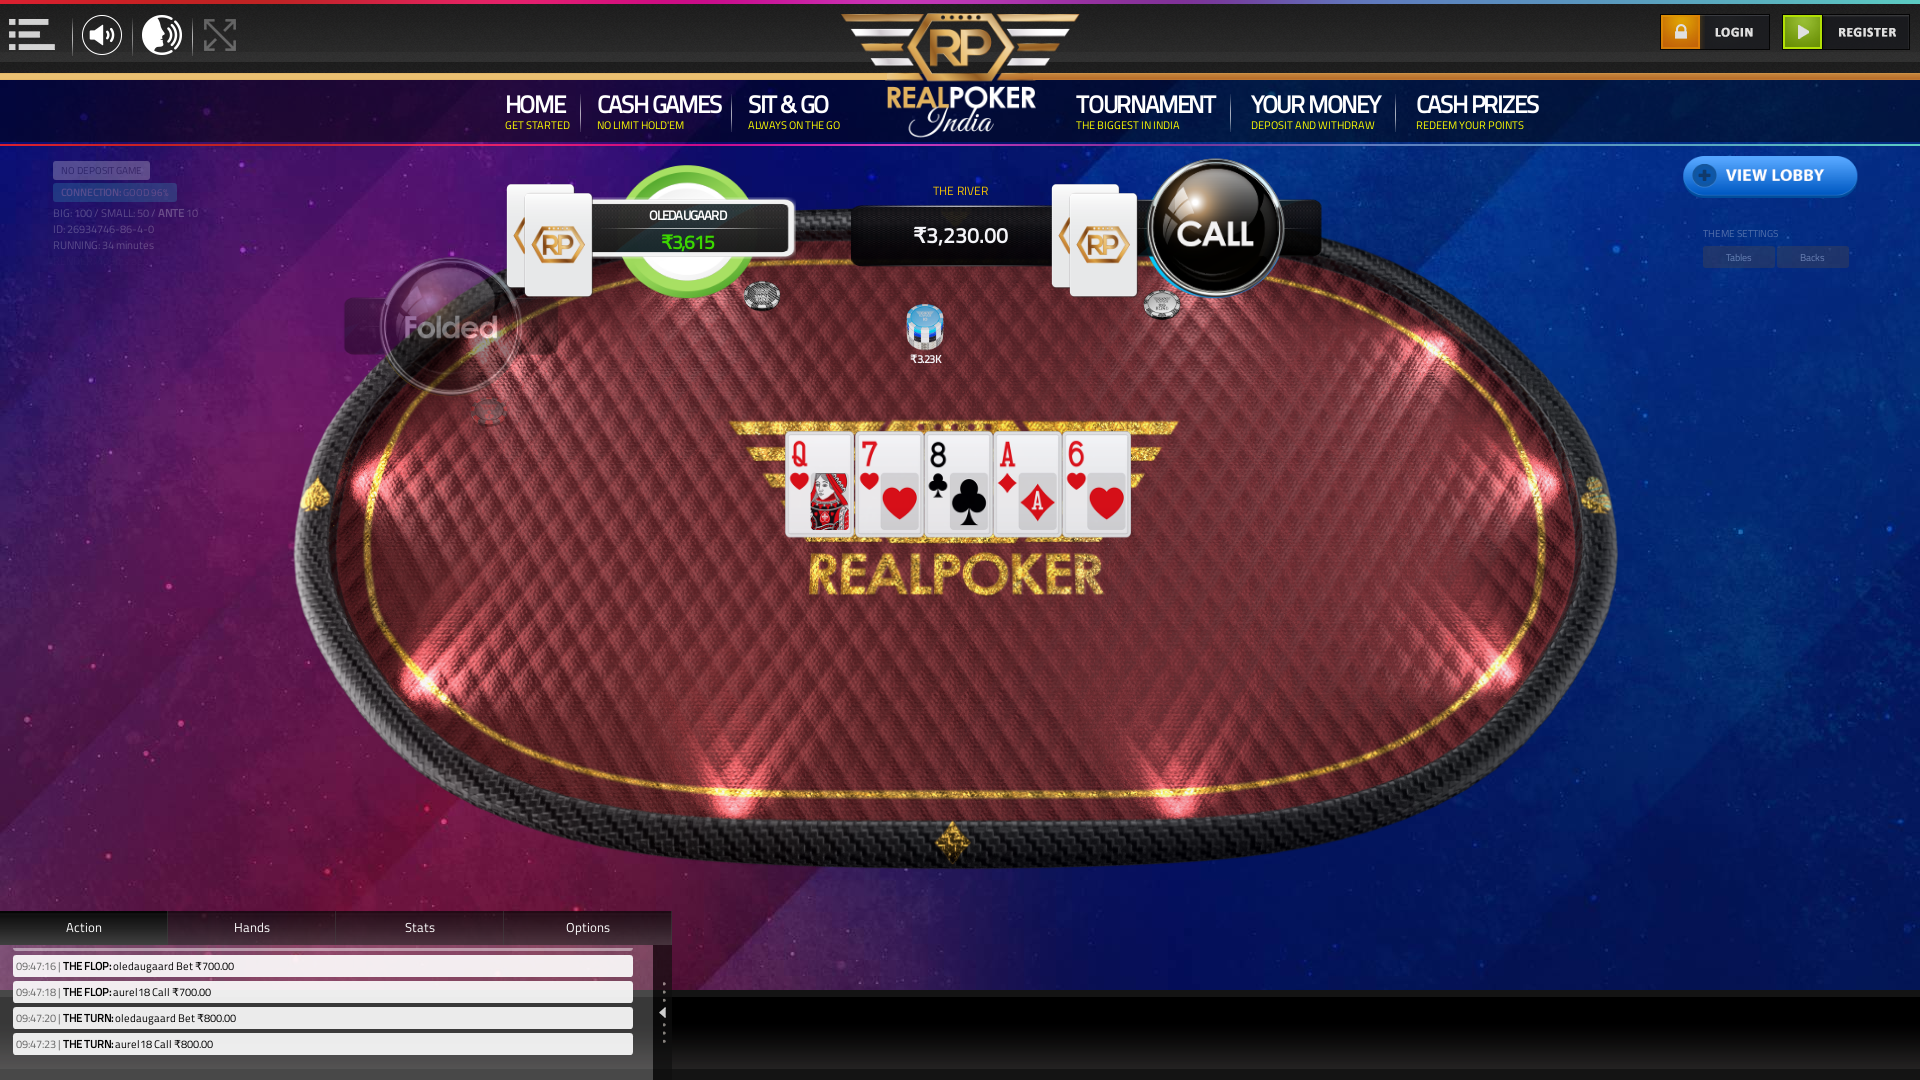 Real poker 10 player table in the 34th minute